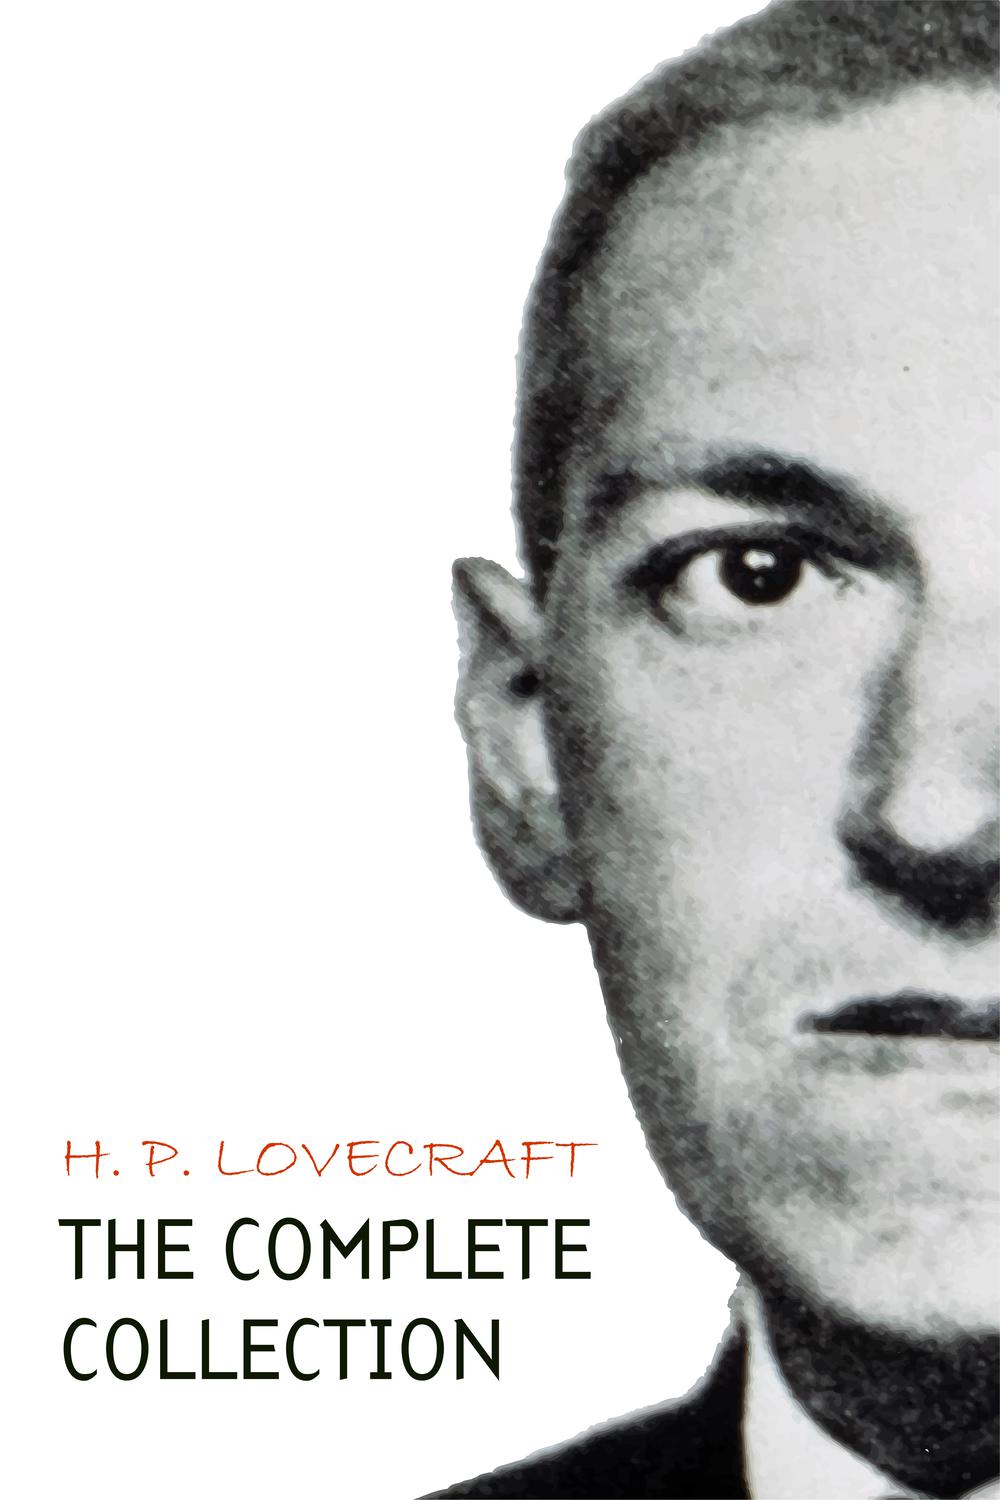 H. P. Lovecraft: The Complete Collection - H. P. Lovecraft